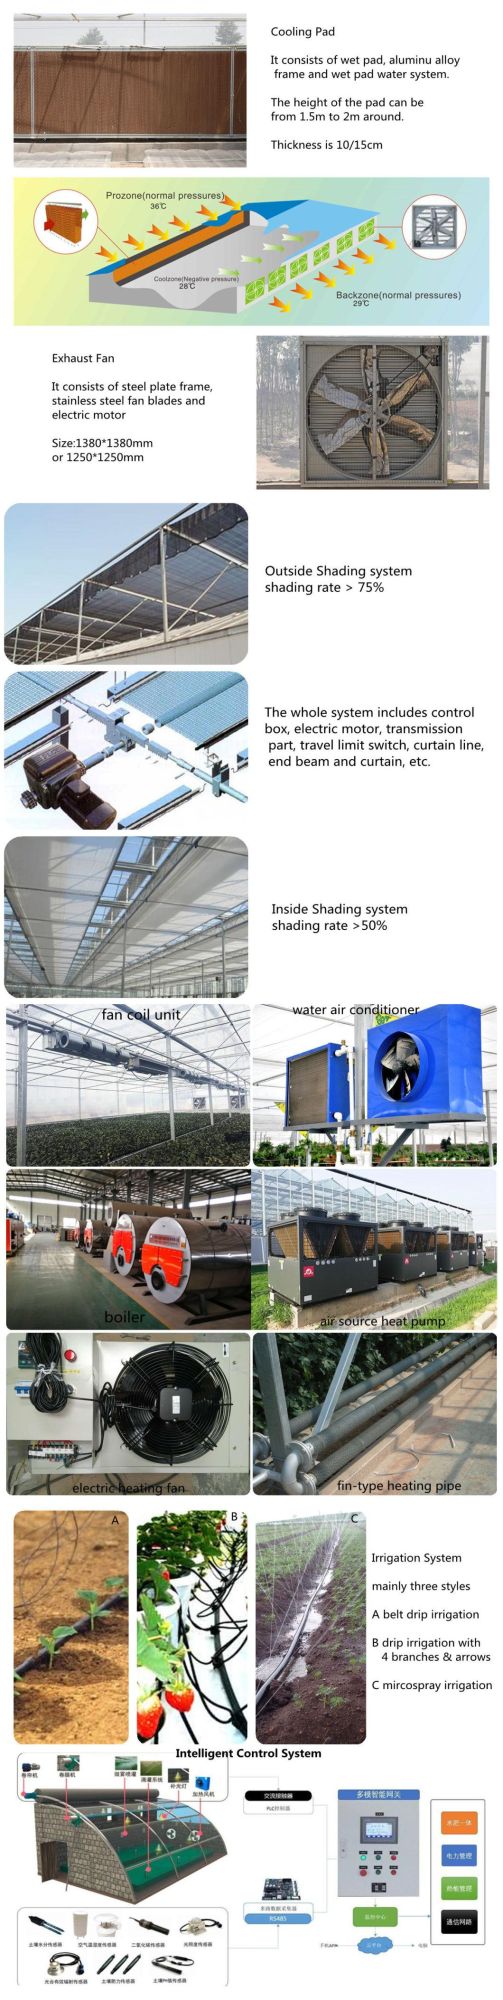 220V/50Hz Advanced Sowing Device Customized Pneumatic Sowing Machine Used Inside Greenhouse for Different Sizes of Seeds Tray Seedling for Modern Agriculture